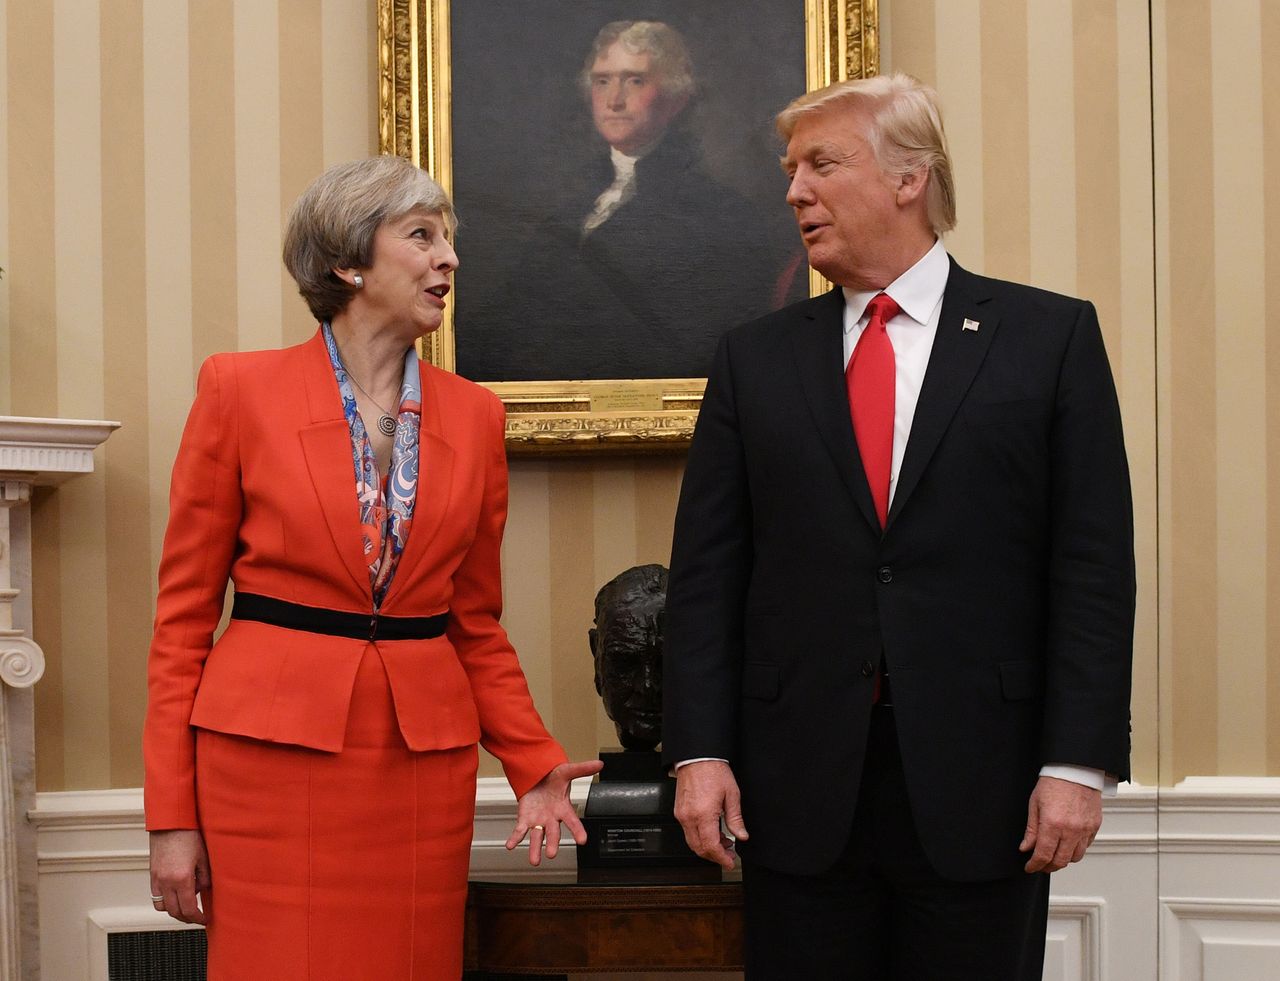 Theresa May and Donald Trump have agreed that the suspected chemical attack in Syria must not go unchallenged